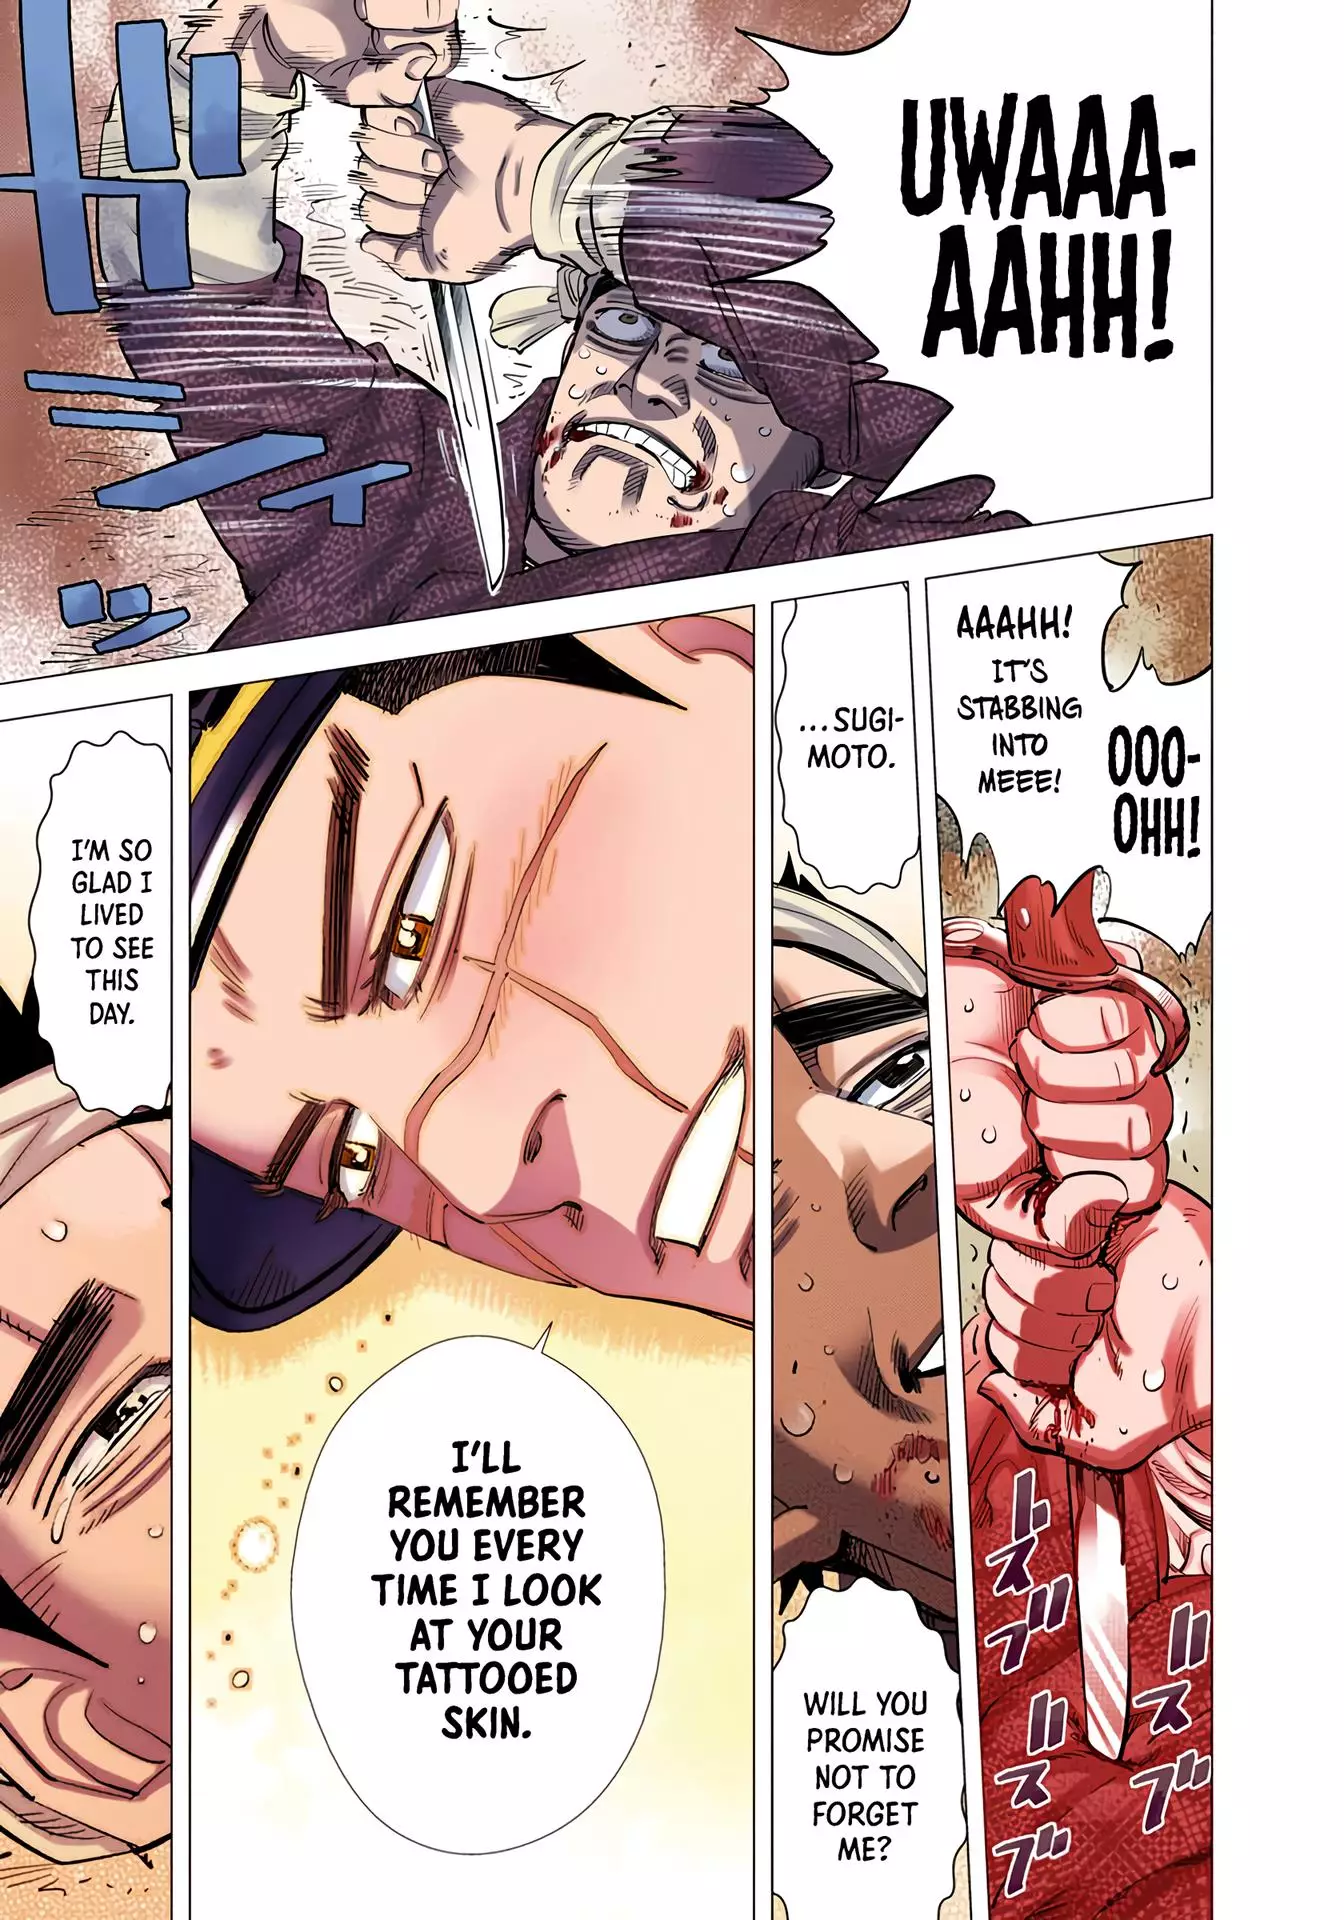 Golden Kamuy - Digital Colored Comics - 41 page 6-7fb8afab